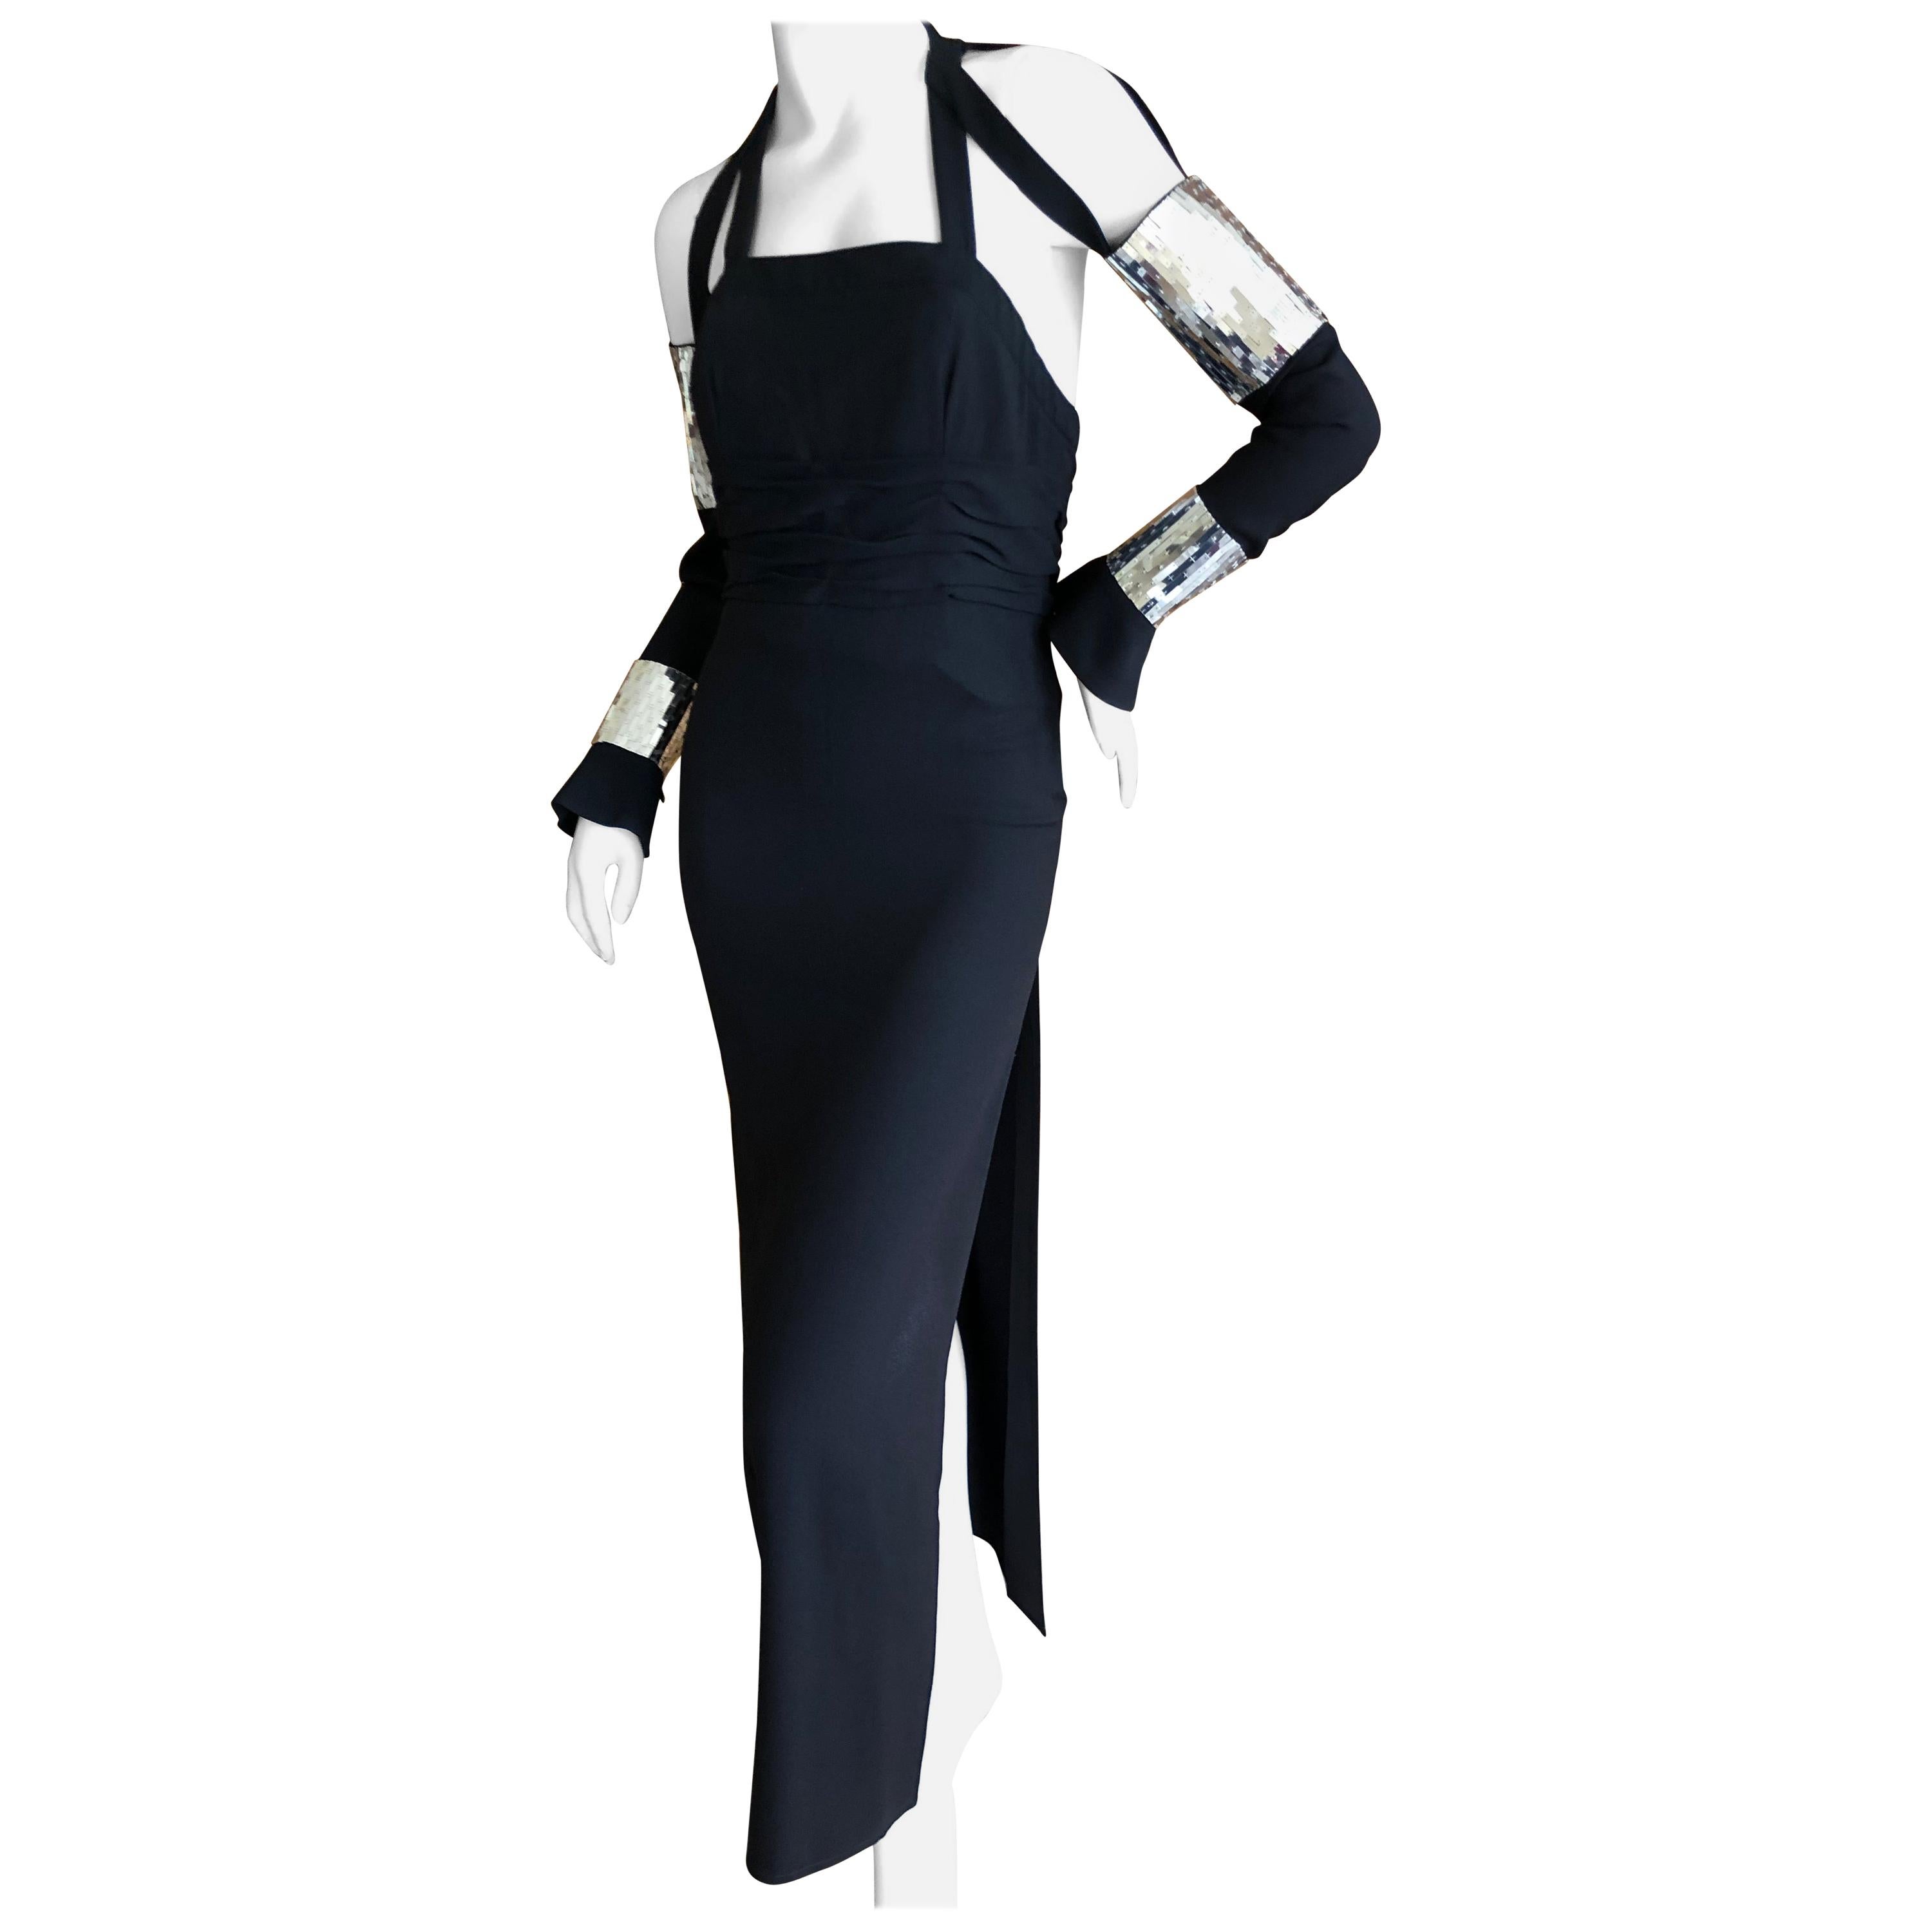 Karl Lagerfeld 1984 Evening Dress with Sequin Sleeves Attached by Bondage Straps For Sale